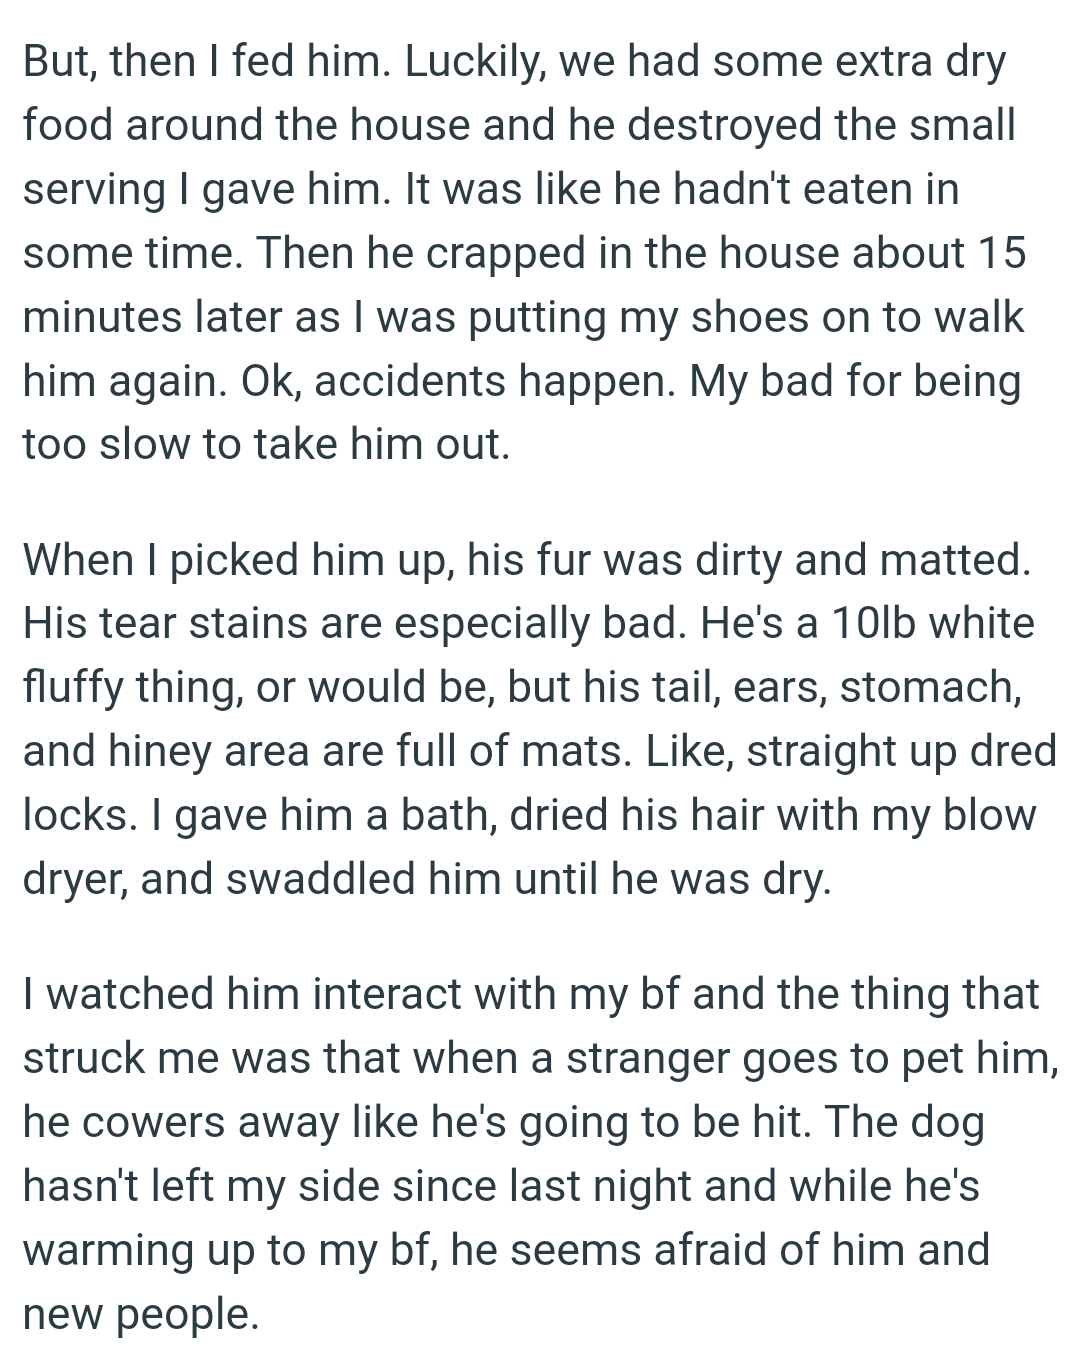 The OP gave him a bath, dried his hair with her blow dryer, and swaddled him until he was dry